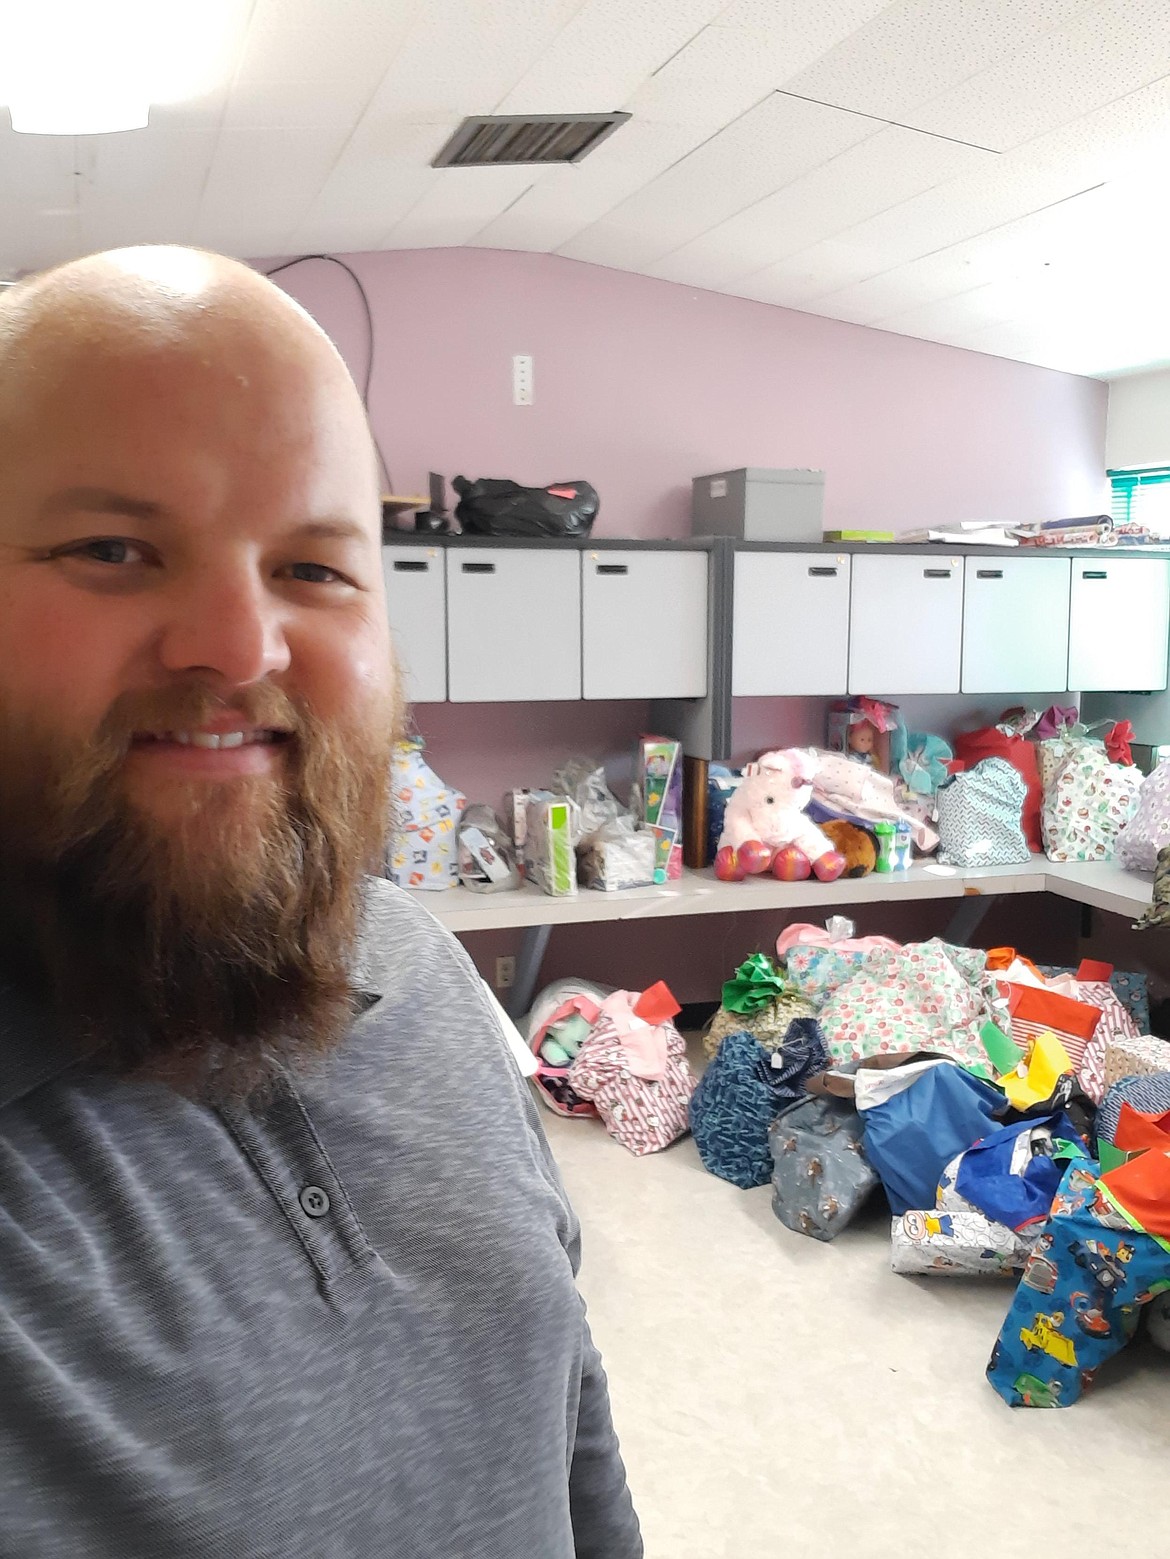 Matt Boyce snaps a selfie with pillowcases stuffed with gifts for foster children in December 2020.